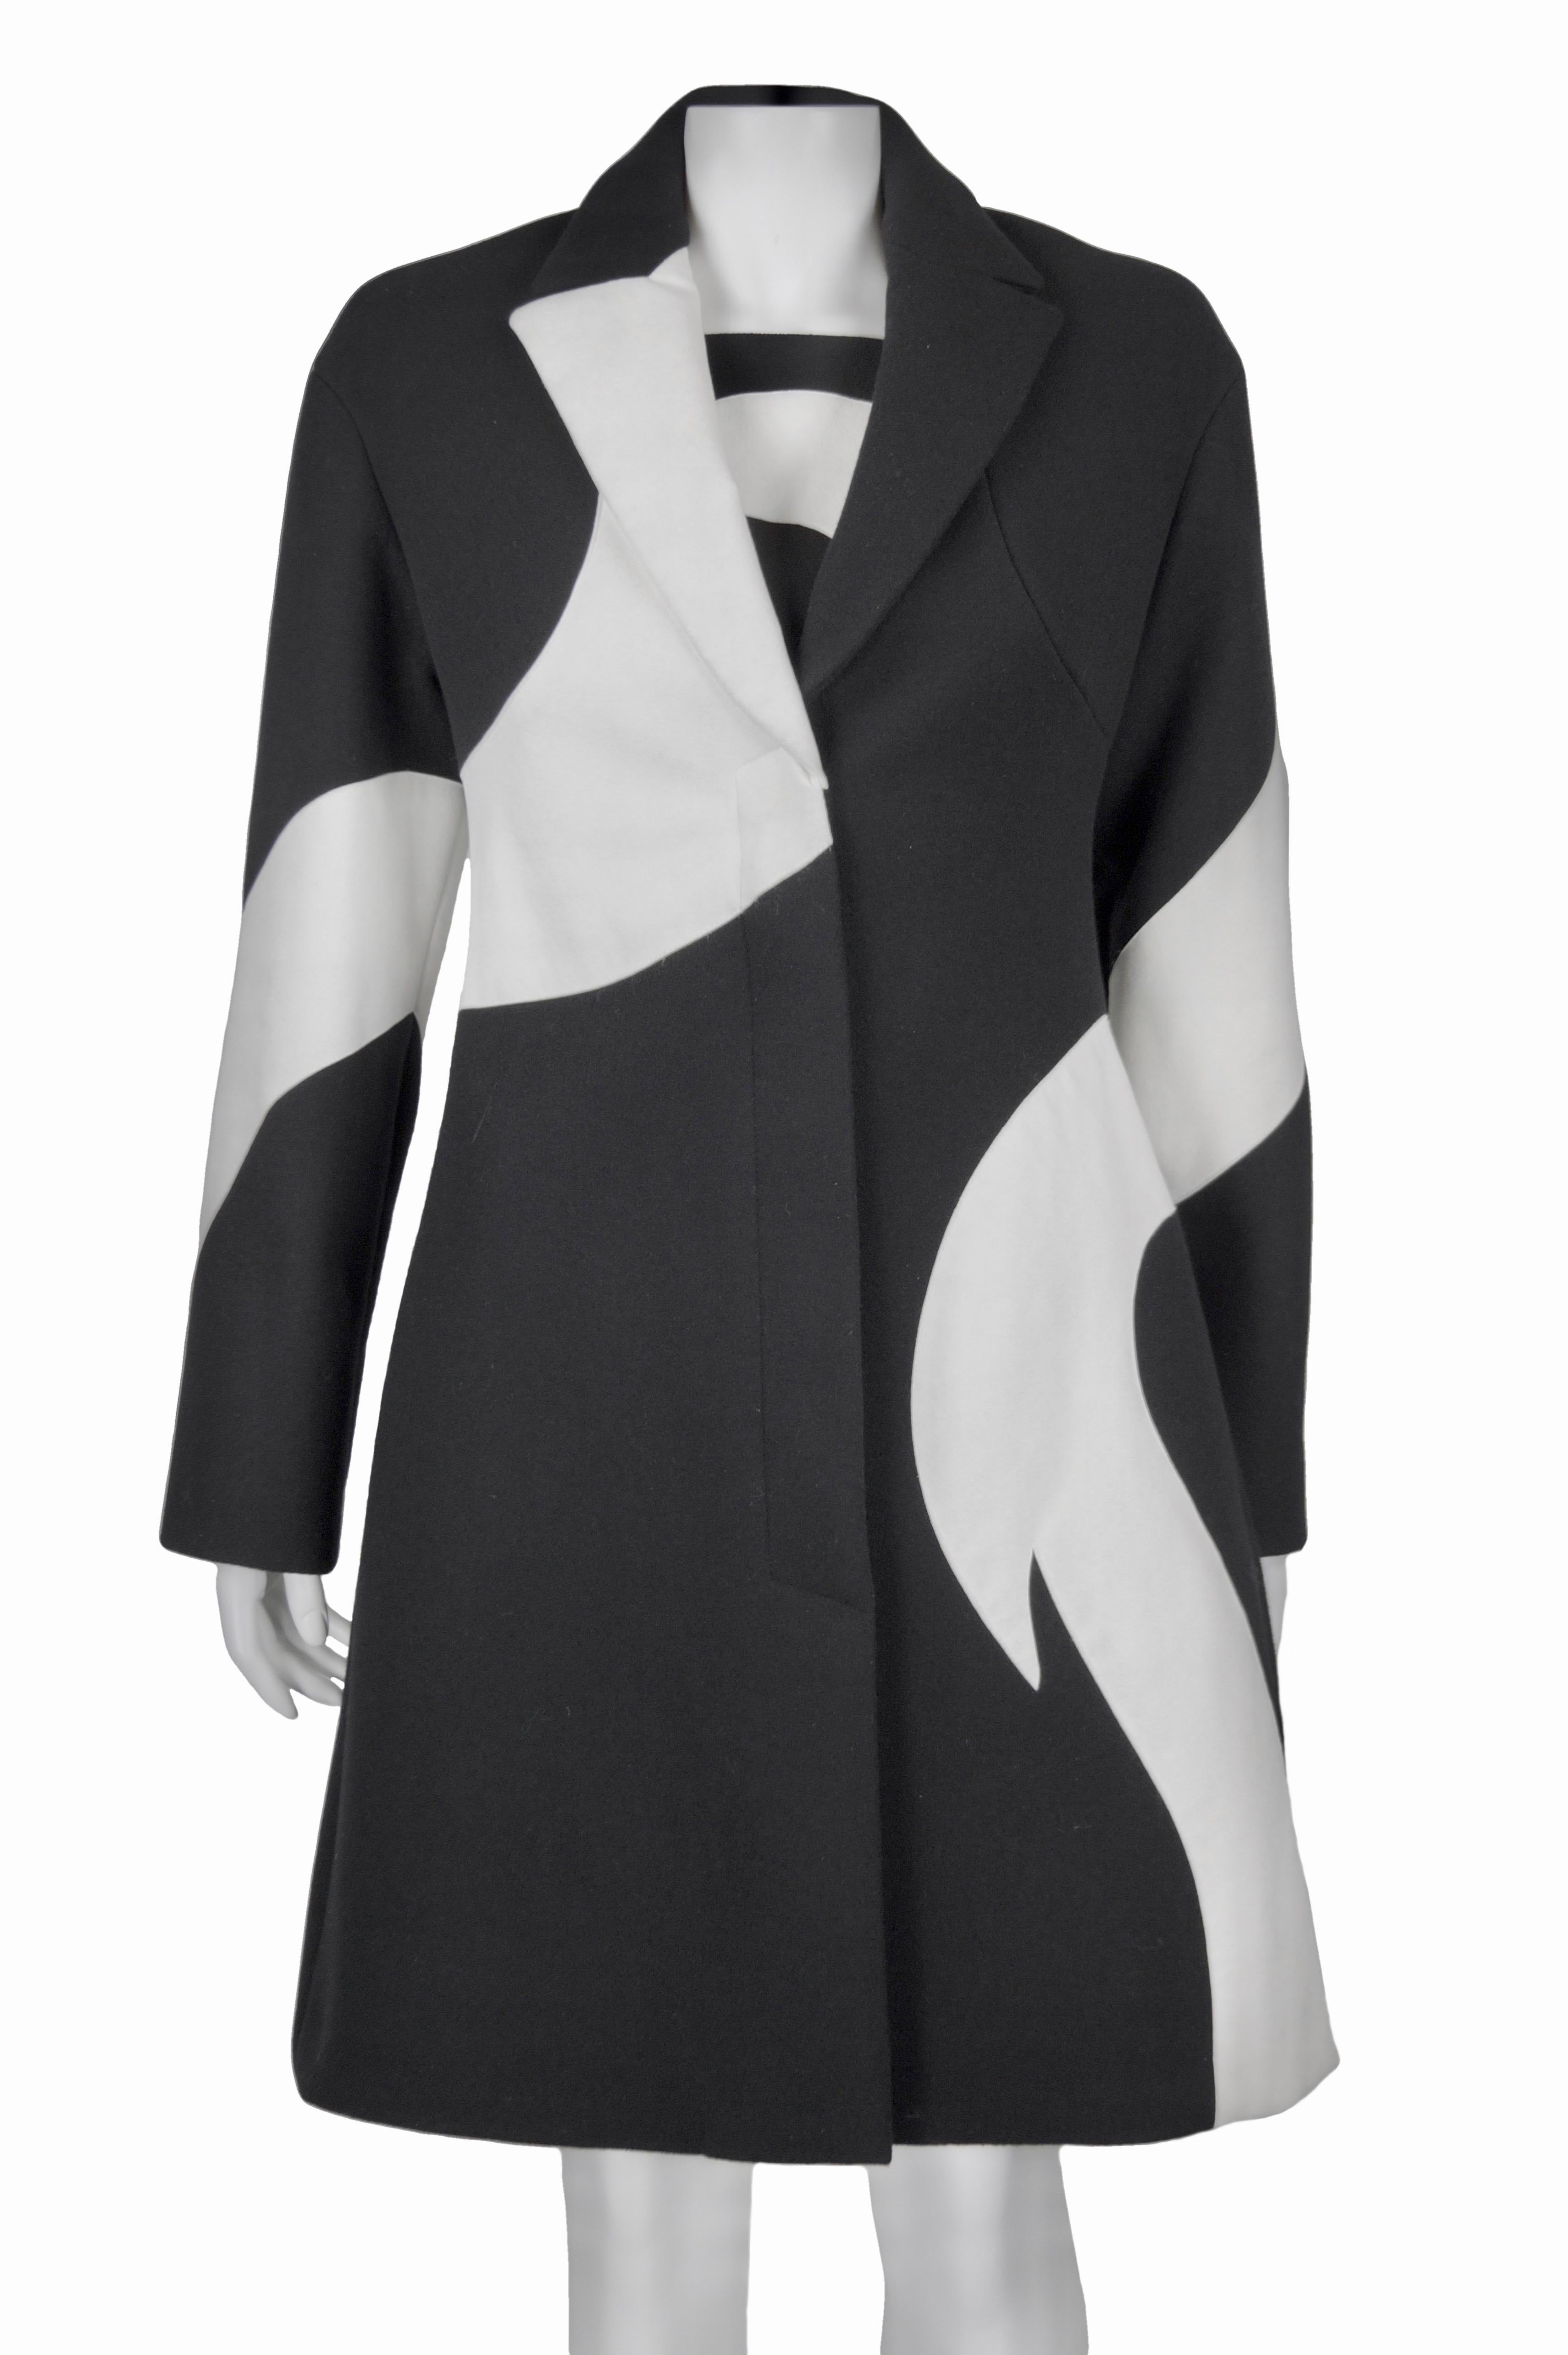 VERSACE FALL 2011 COLLECTION
Black and white coordinated coat and dress
Size  IT 40
Made in Italy
1st fabric (black): 100% wool
2nd fabric (white): 68% polyester 22% polyurethane and looks suede, but it is no t leather. It is alcantara fabric
100%